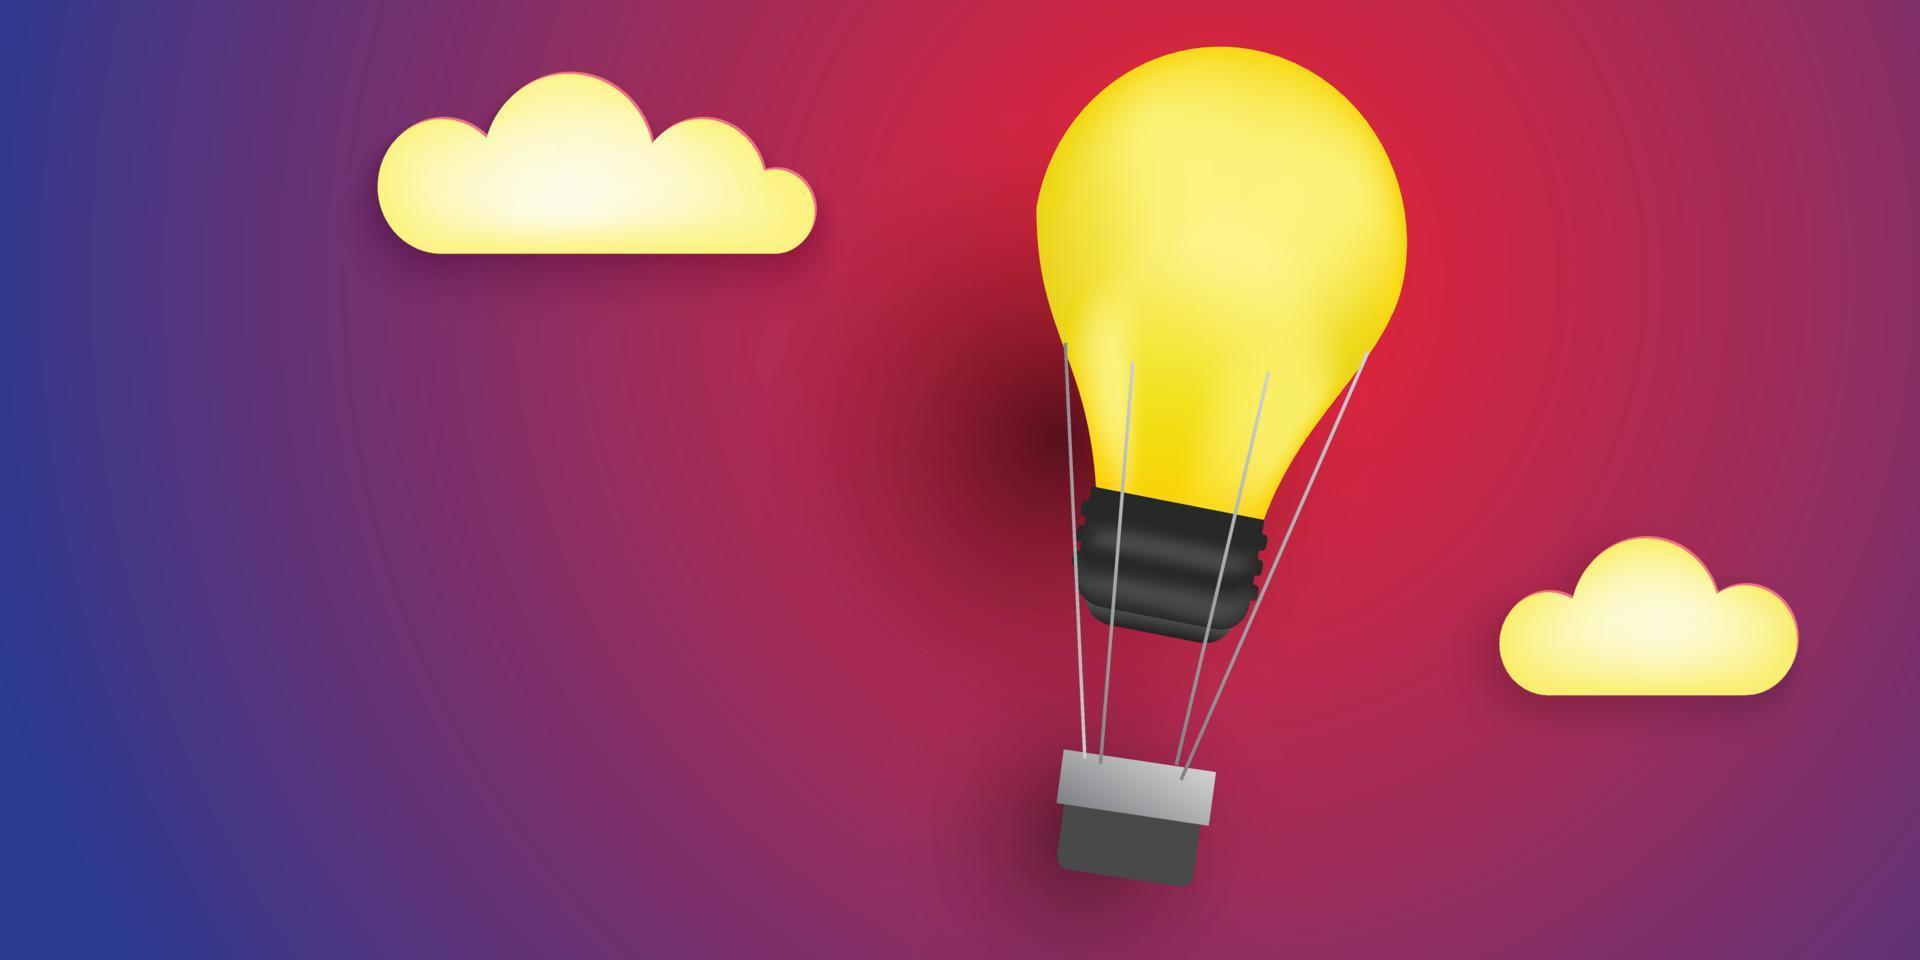 Creative Imagination 3D concept art free vector template with light bulb and parachute illustrations